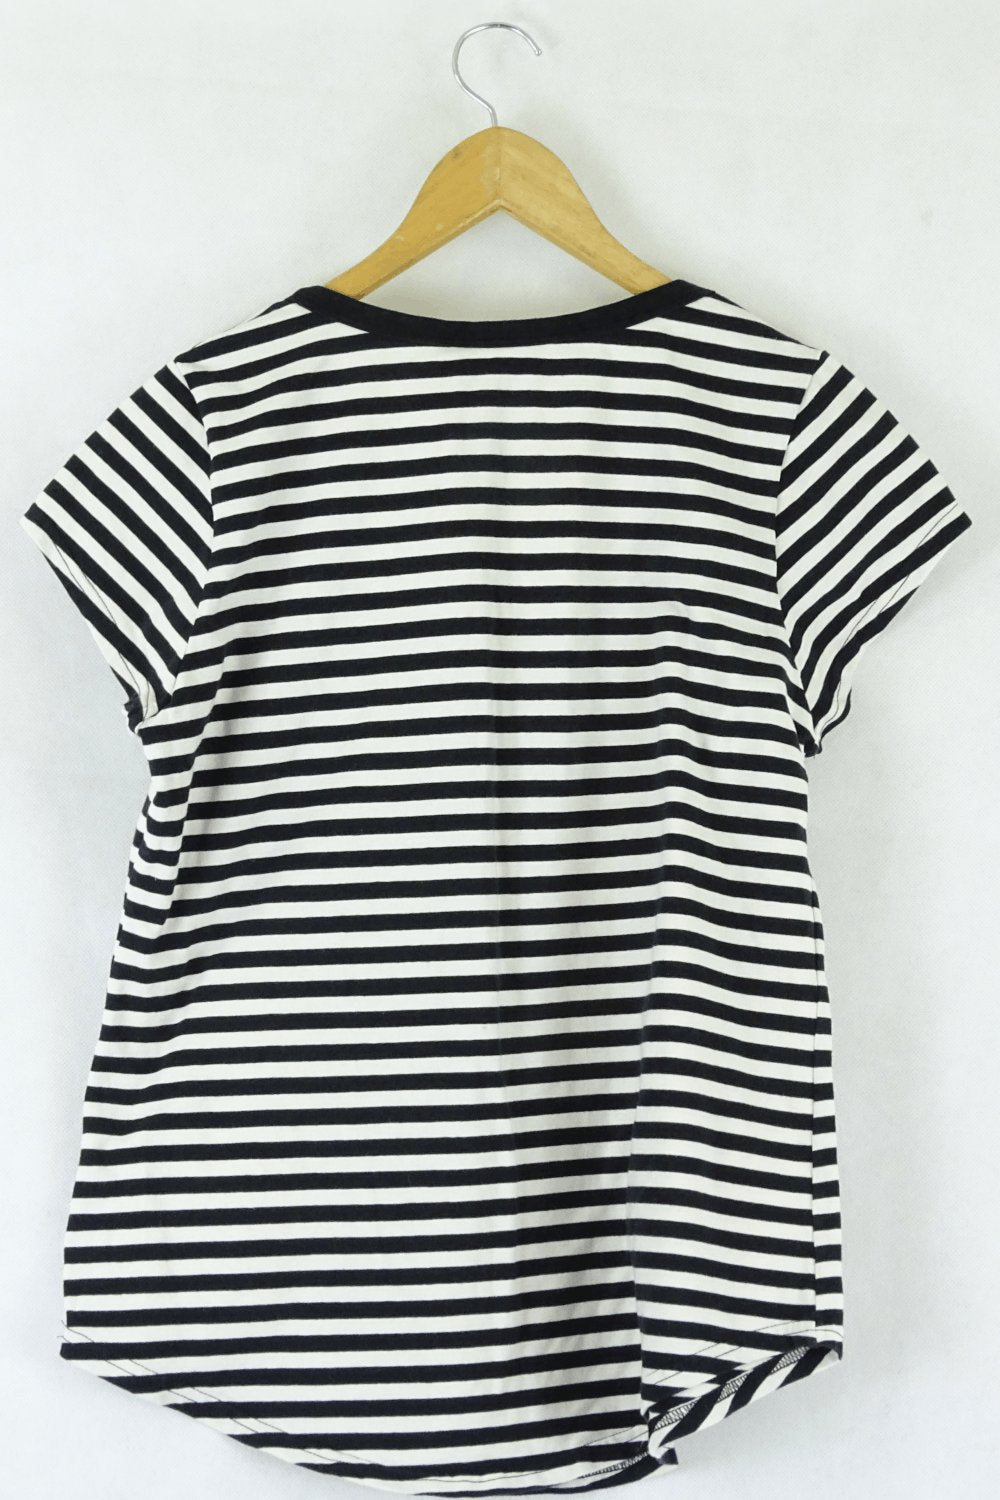 Thunderpants Striped Black And White T-Shirt S